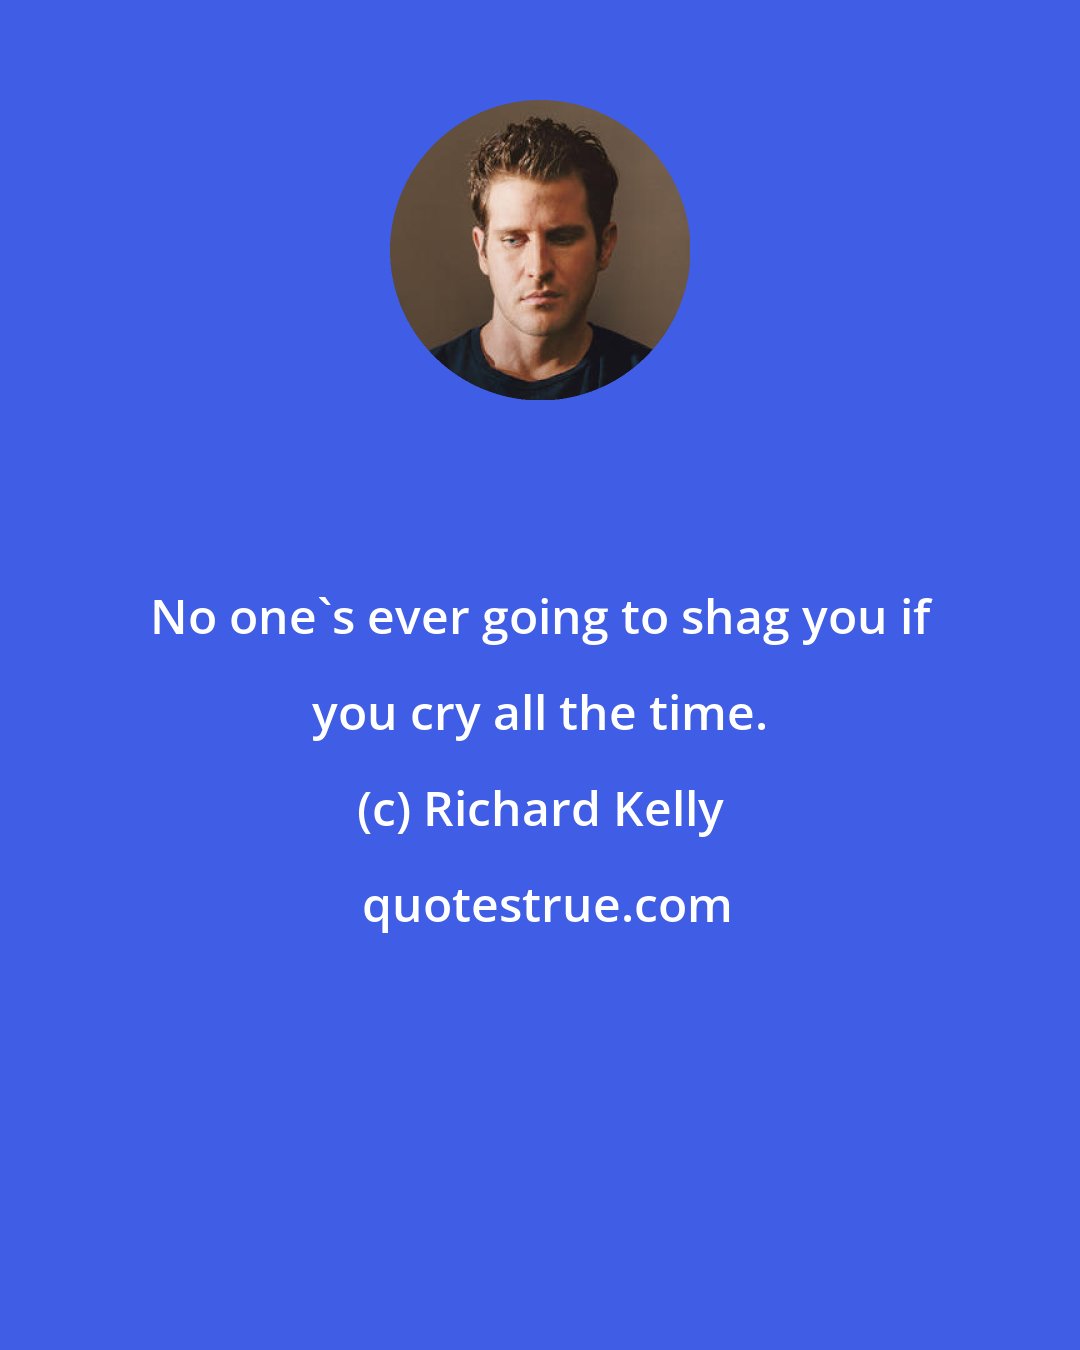 Richard Kelly: No one's ever going to shag you if you cry all the time.